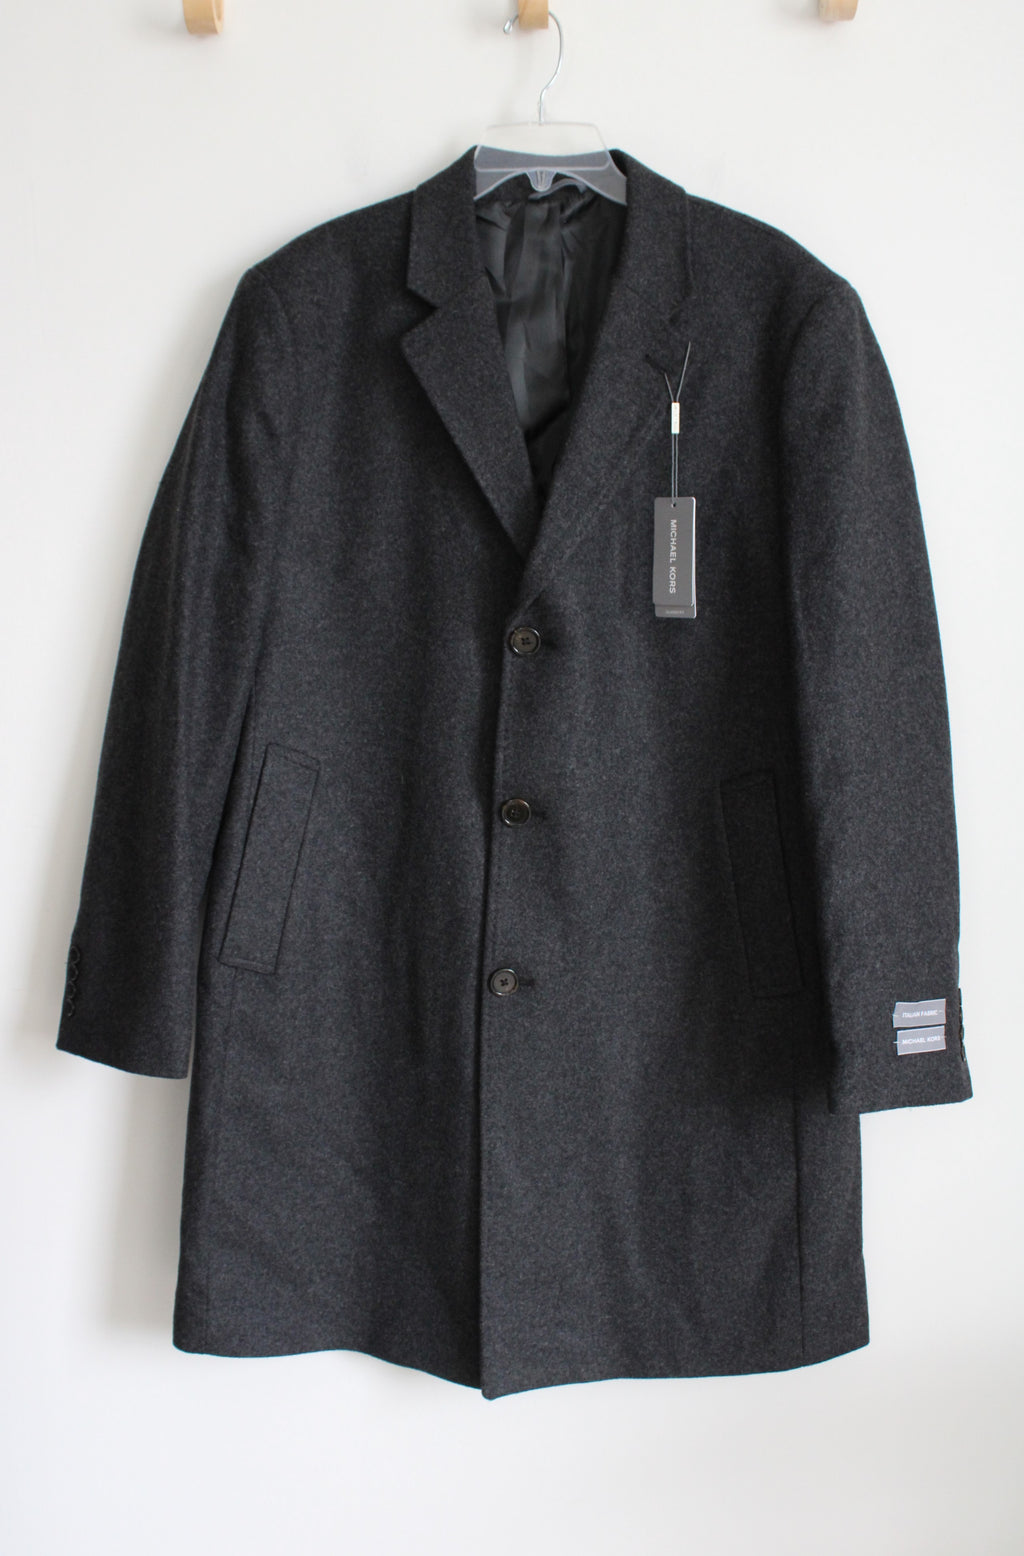 NEW Michael Kors Kavon Classic Fit Gray Wool Trench Coat | 42R